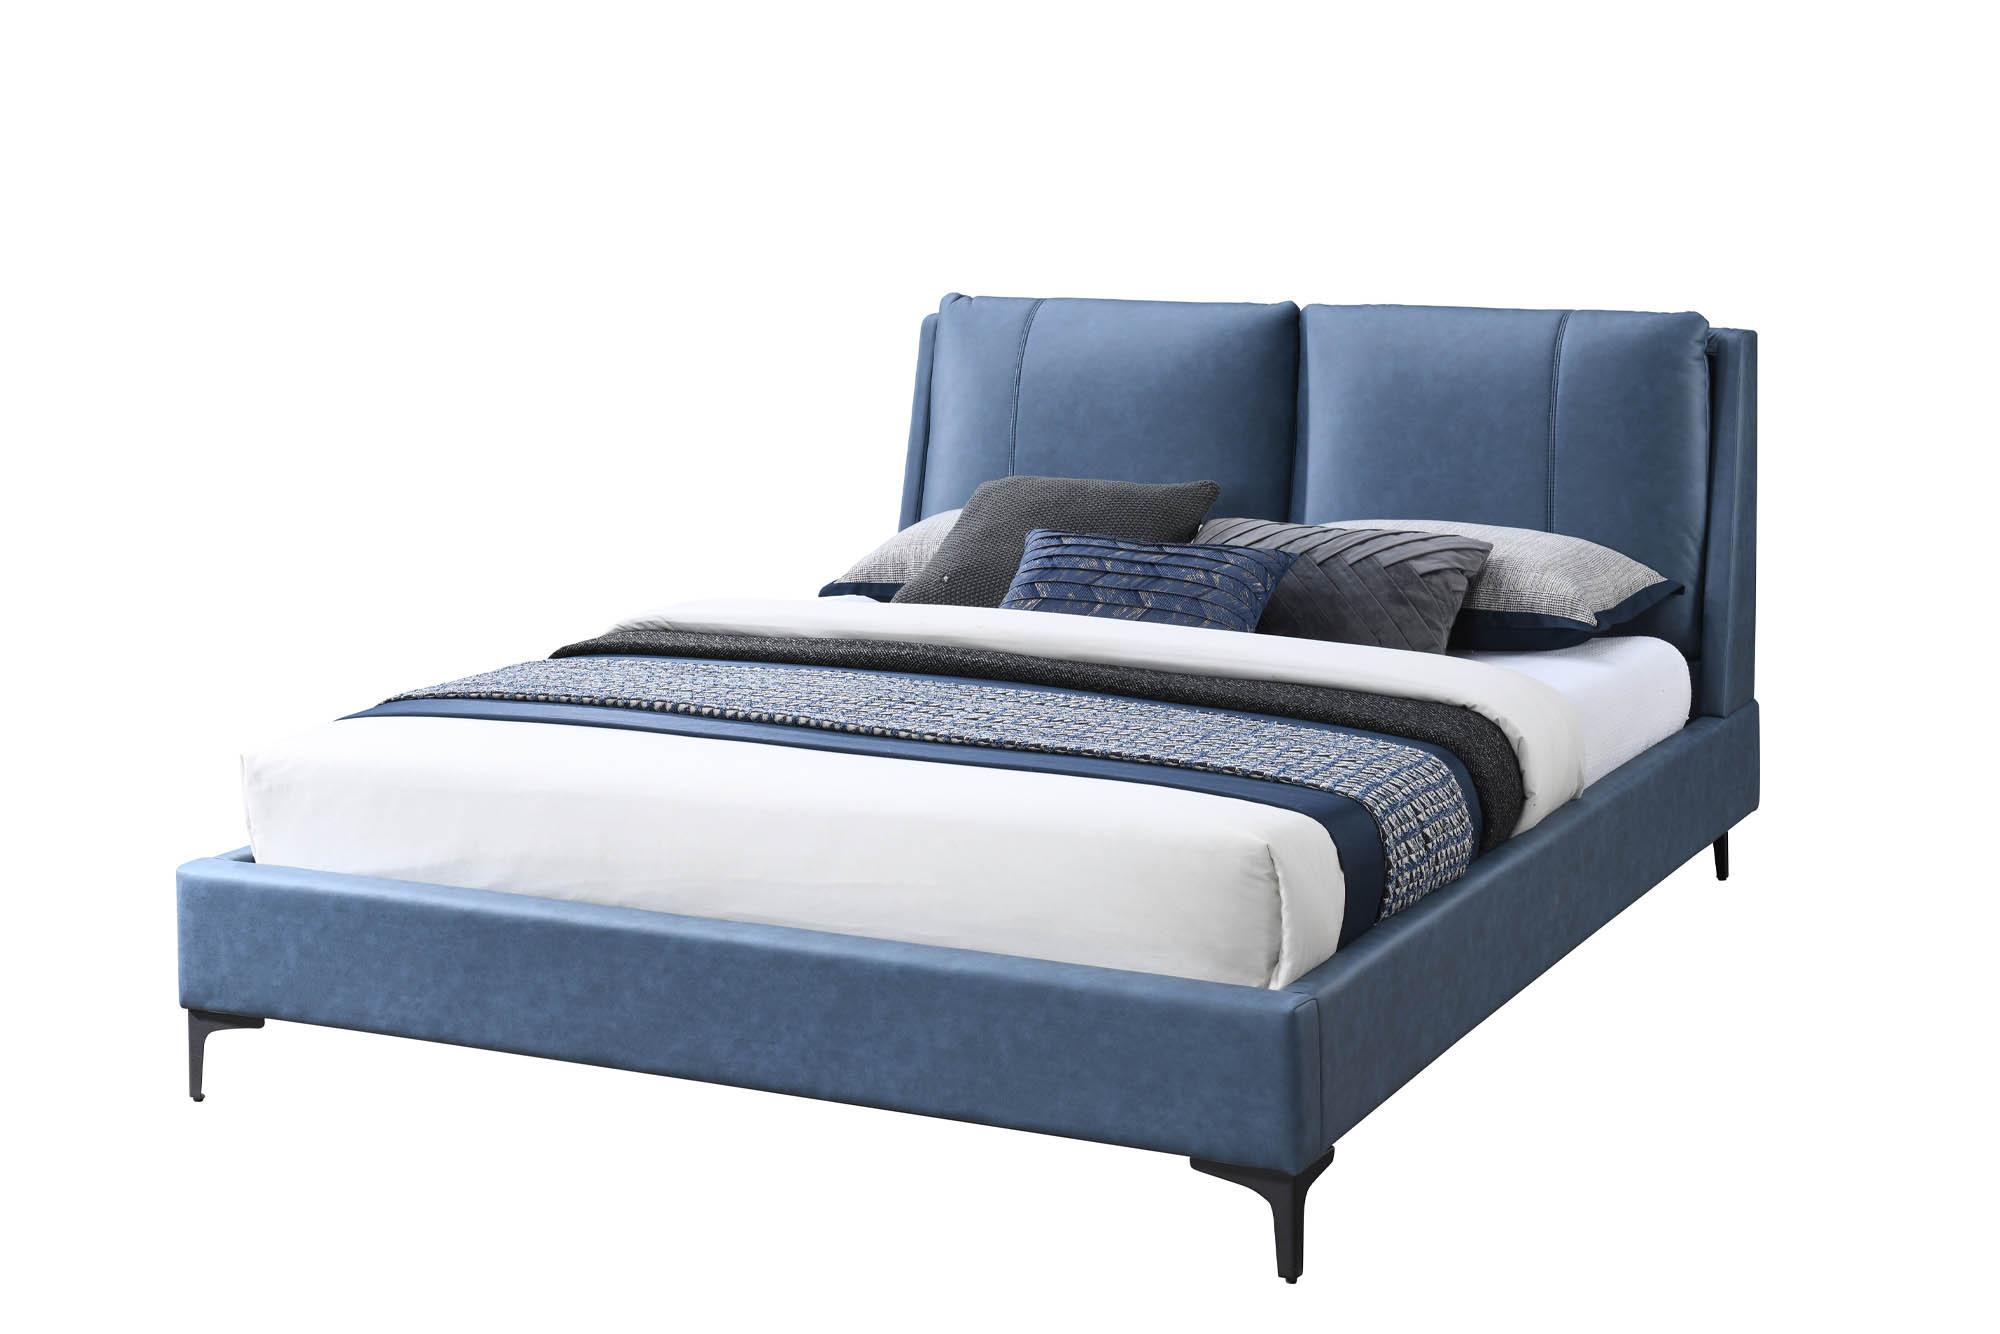 Modern, Transitional Panel Bed BRYANT 1142-105 1142-105 in Blue Polyester